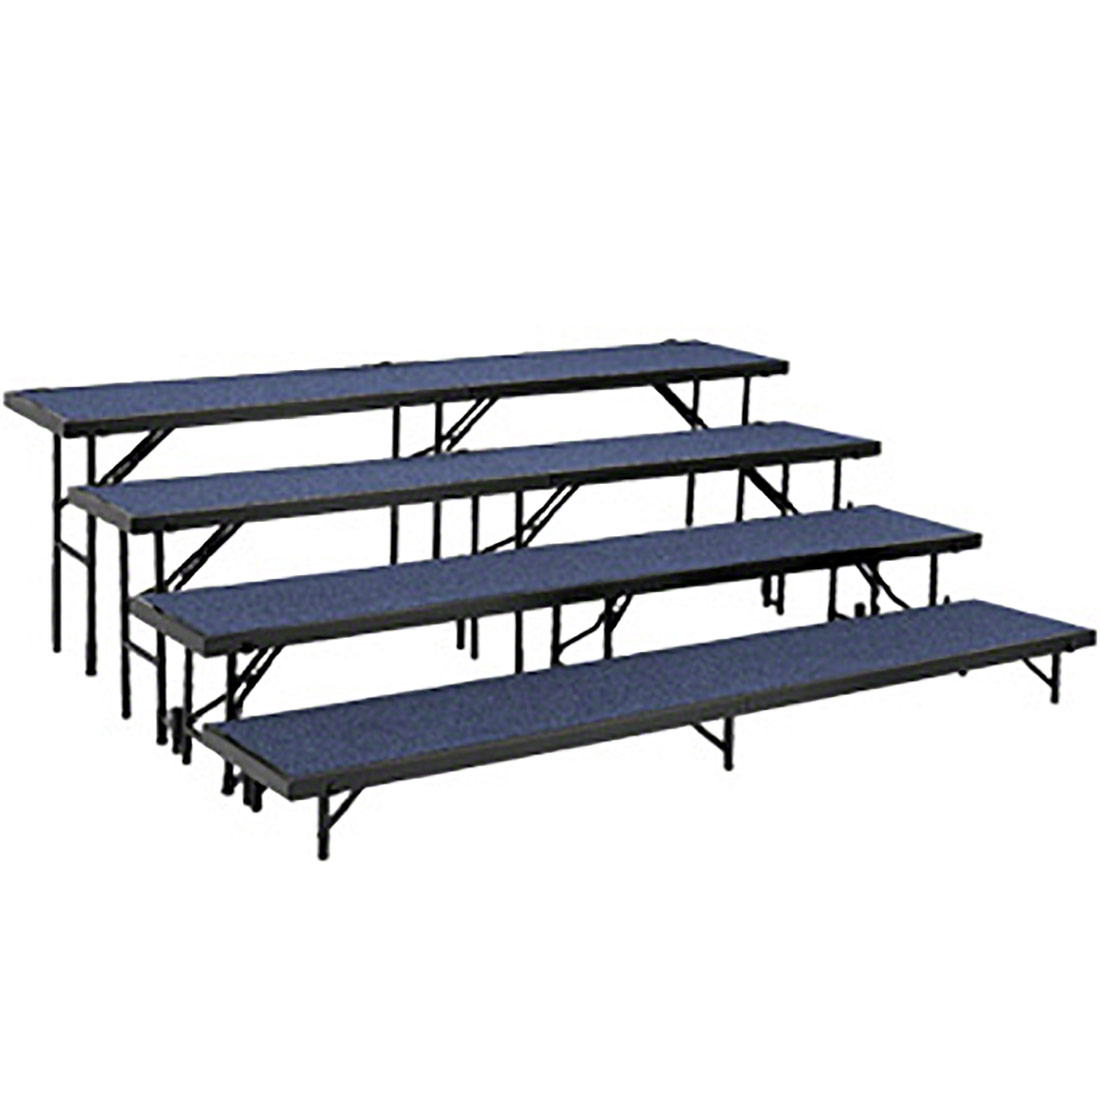 Rt4lc-04 4 Level Tapered Standing Choral Riser, Blue Carpet - 18 X 96 In. Platform